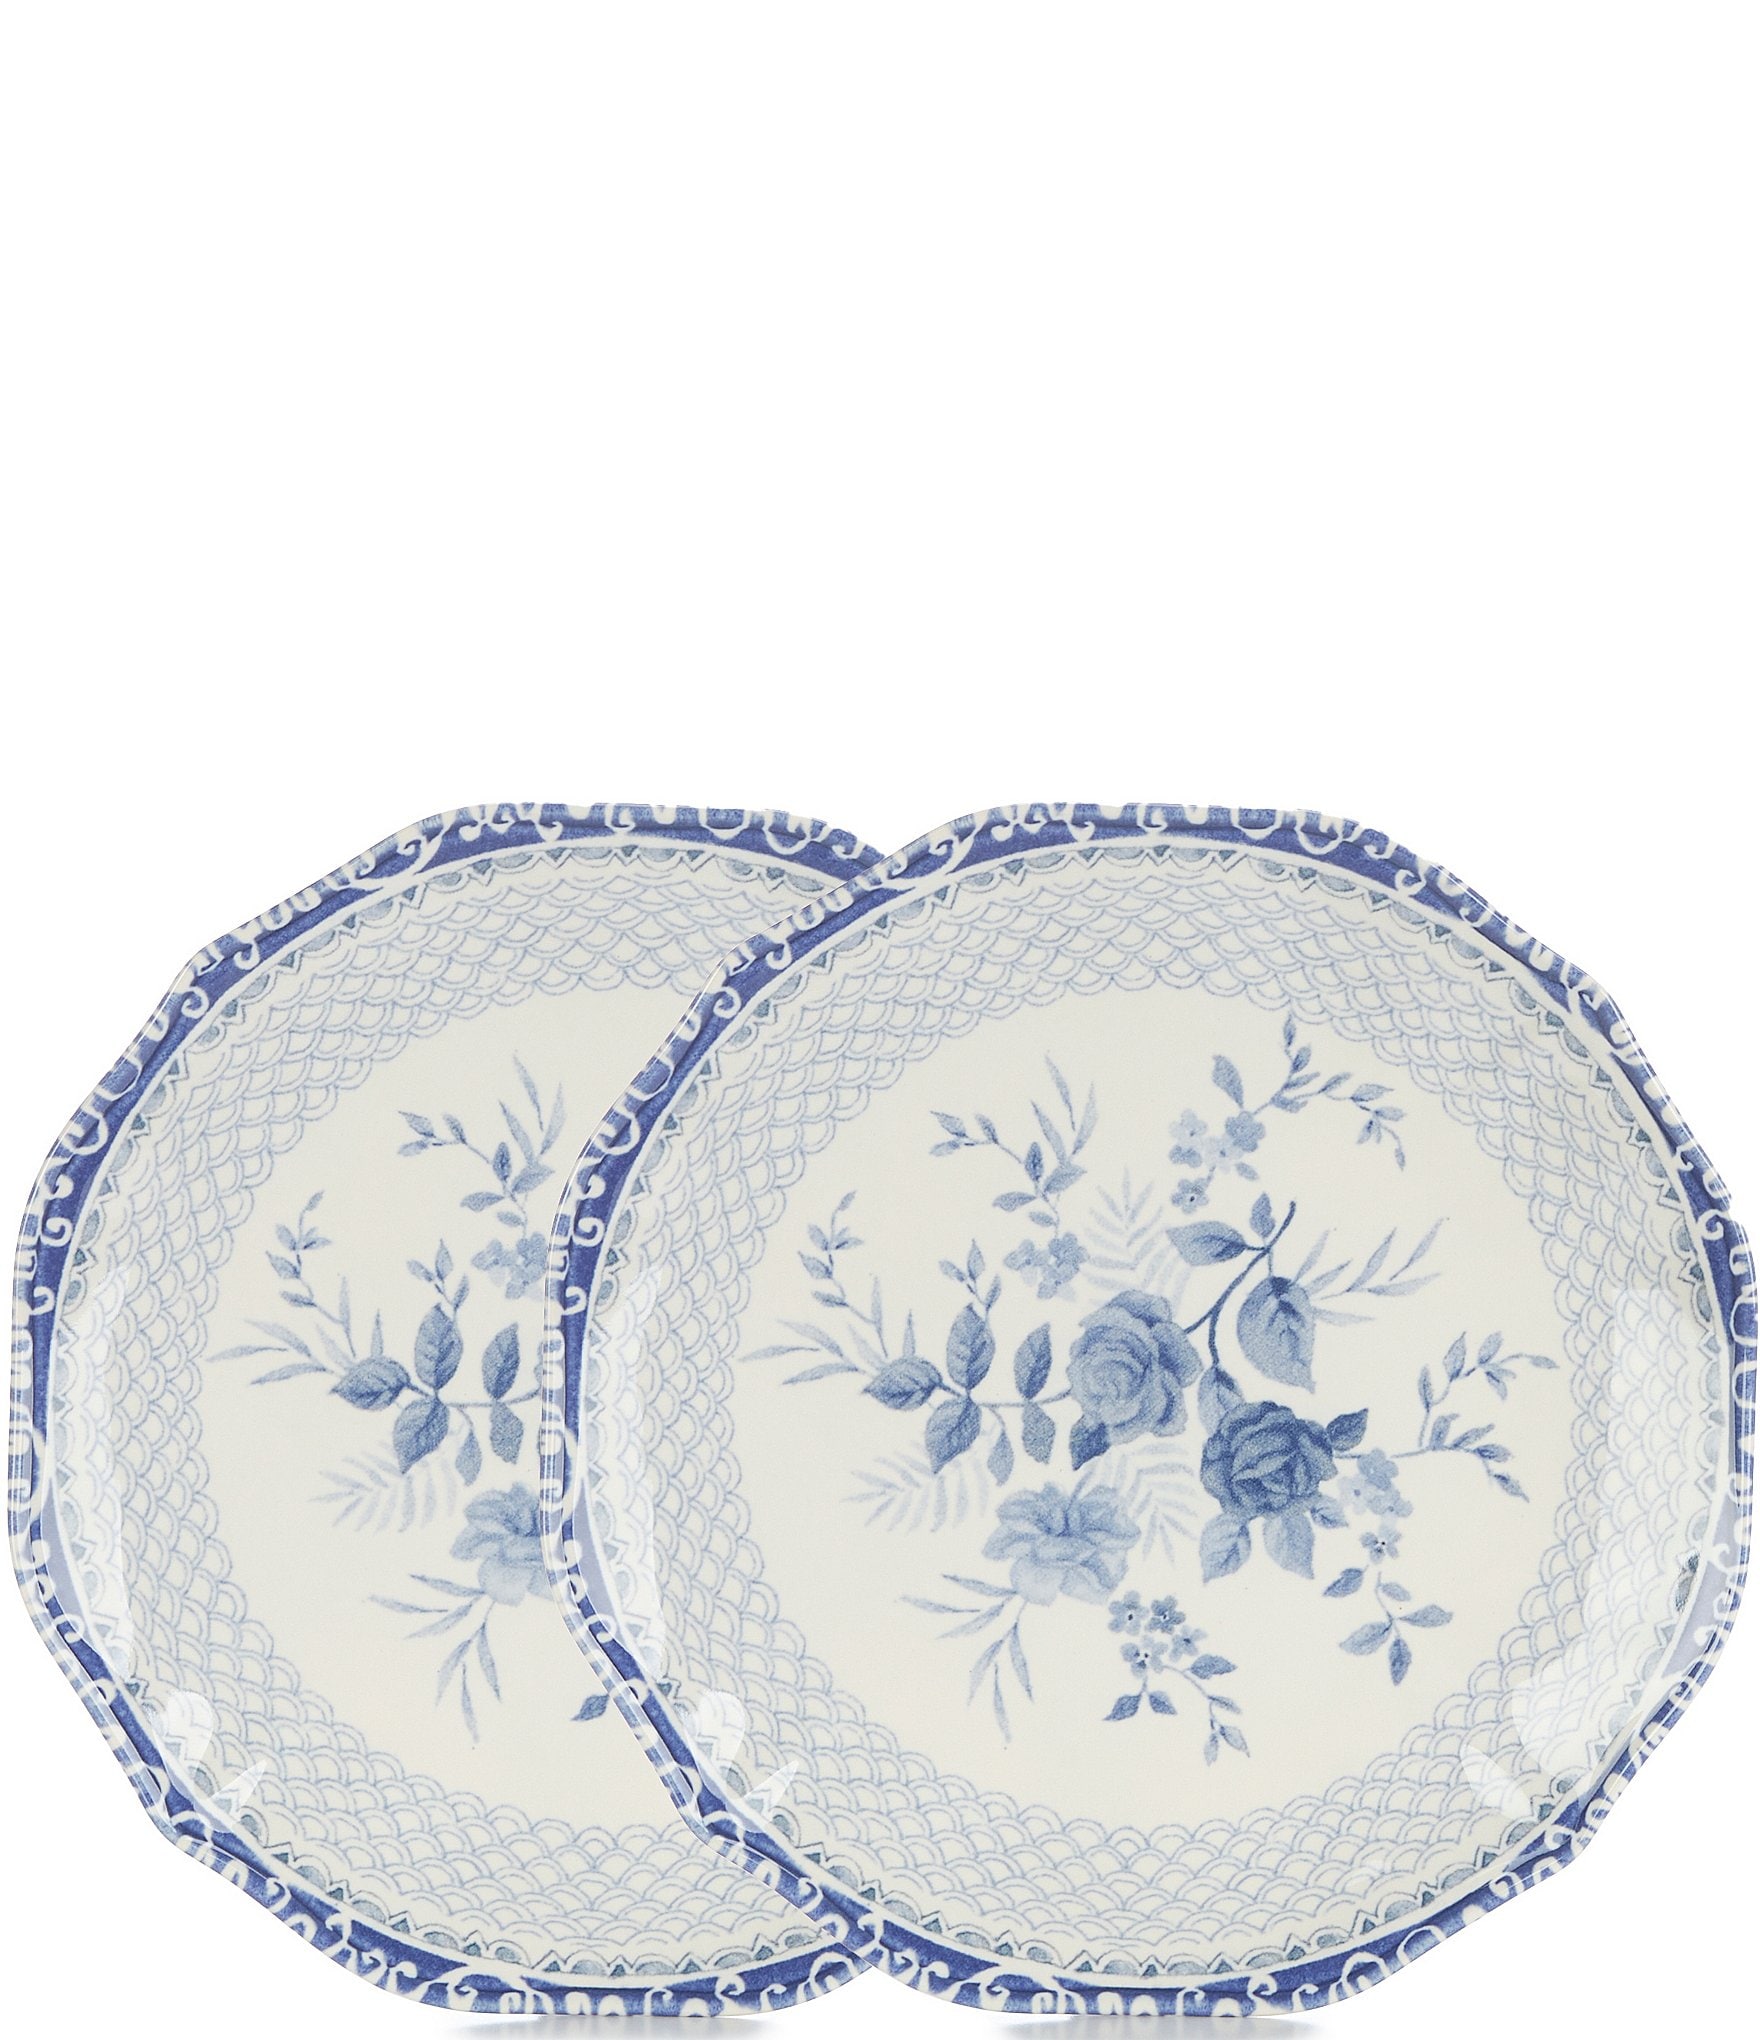 https://dimg.dillards.com/is/image/DillardsZoom/zoom/southern-living-blue--white-chinoiserie-salad-plates-set-of-2/00000000_zi_a15411af-18bb-4013-ba6a-b6de5a27ec26.jpg